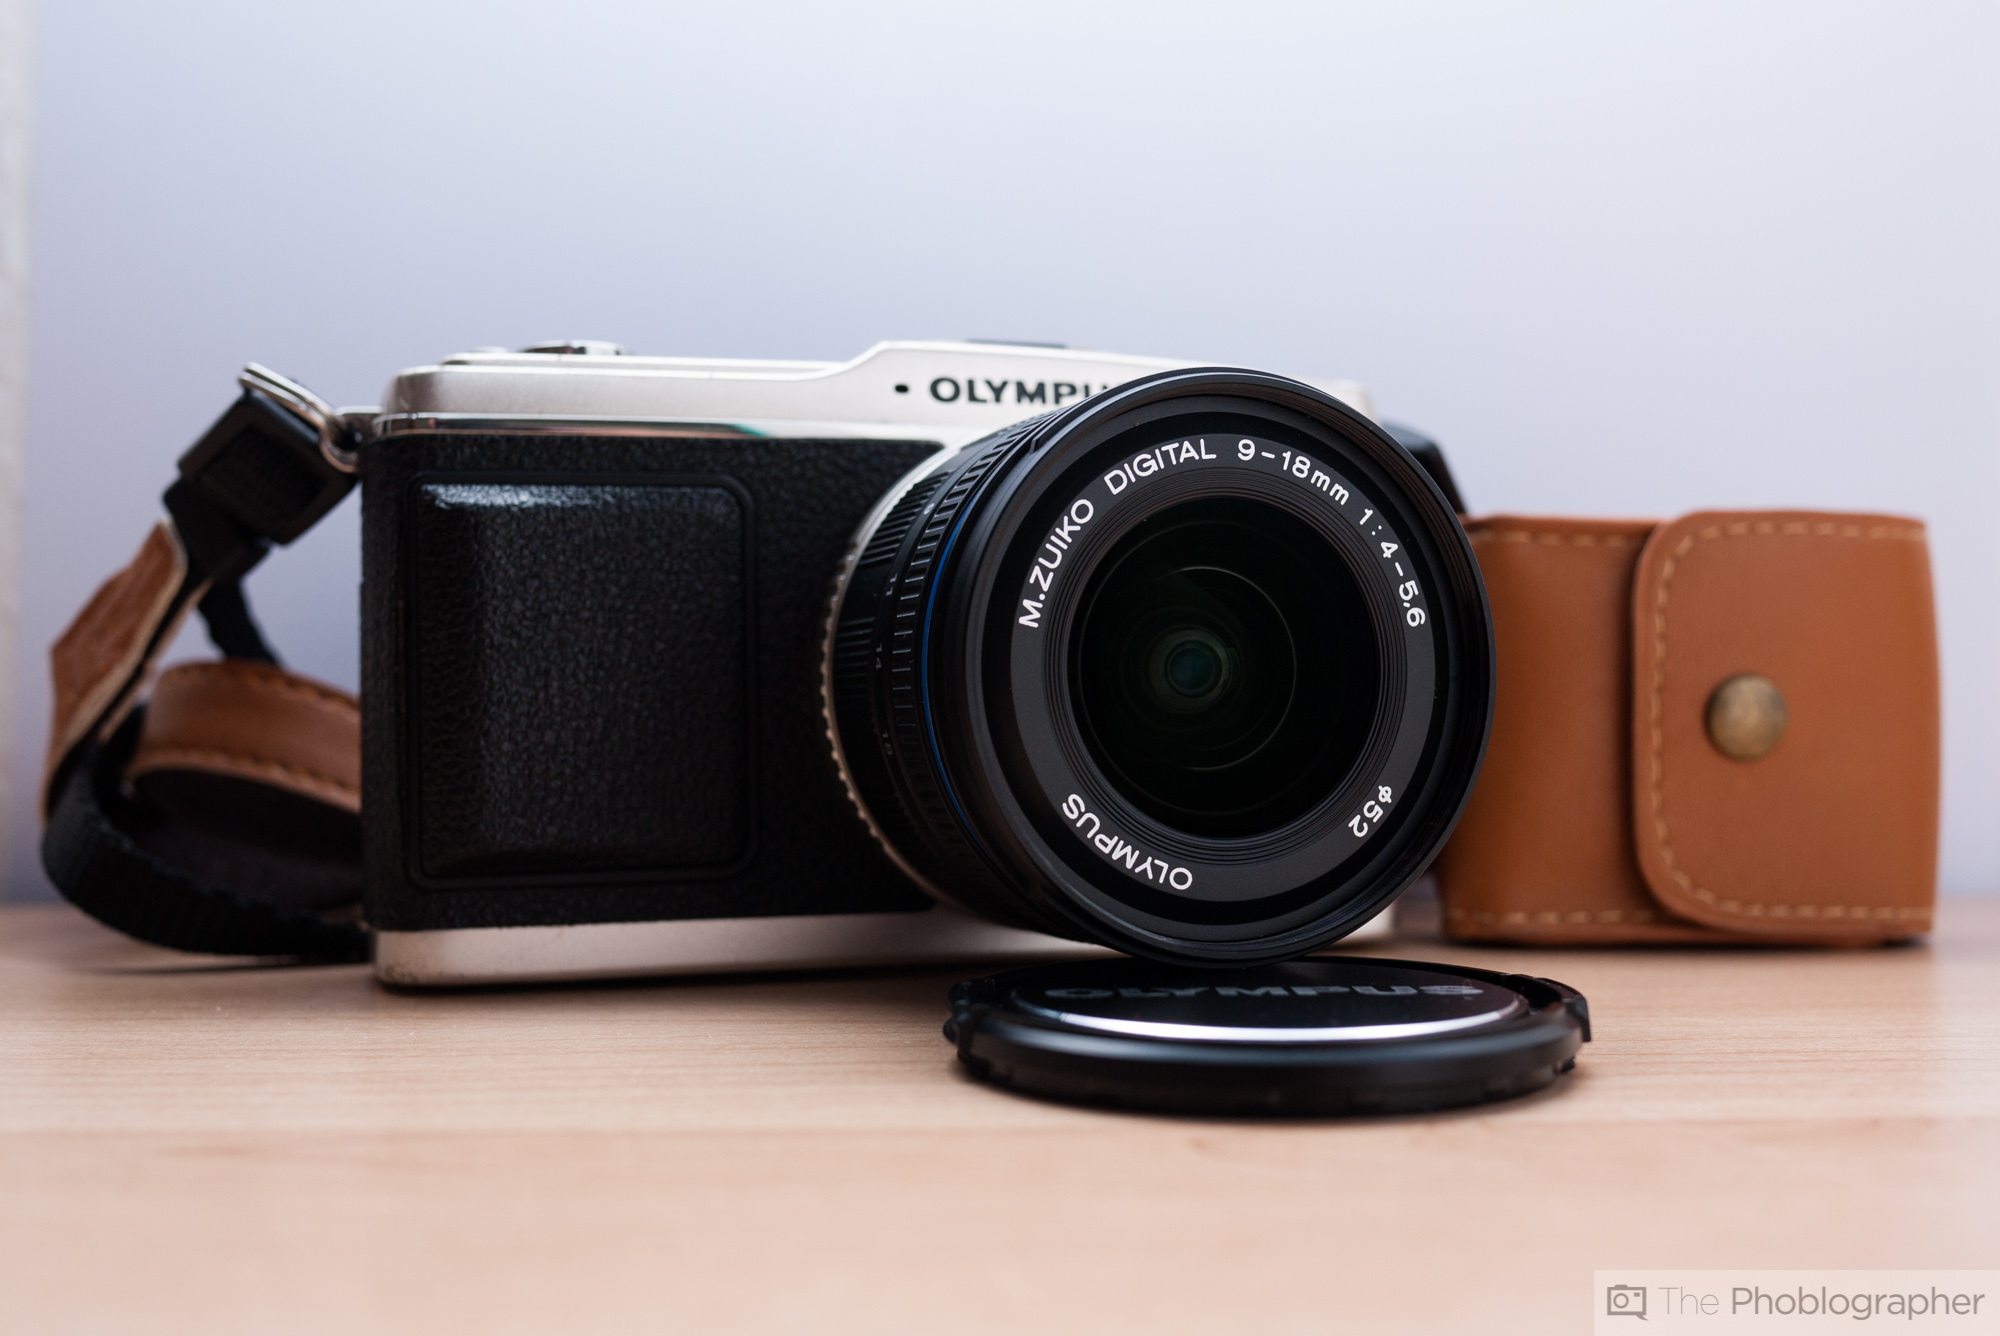 Review: Olympus M.Zuiko 9-18mm f4-5.6 (Micro Four Thirds) - The